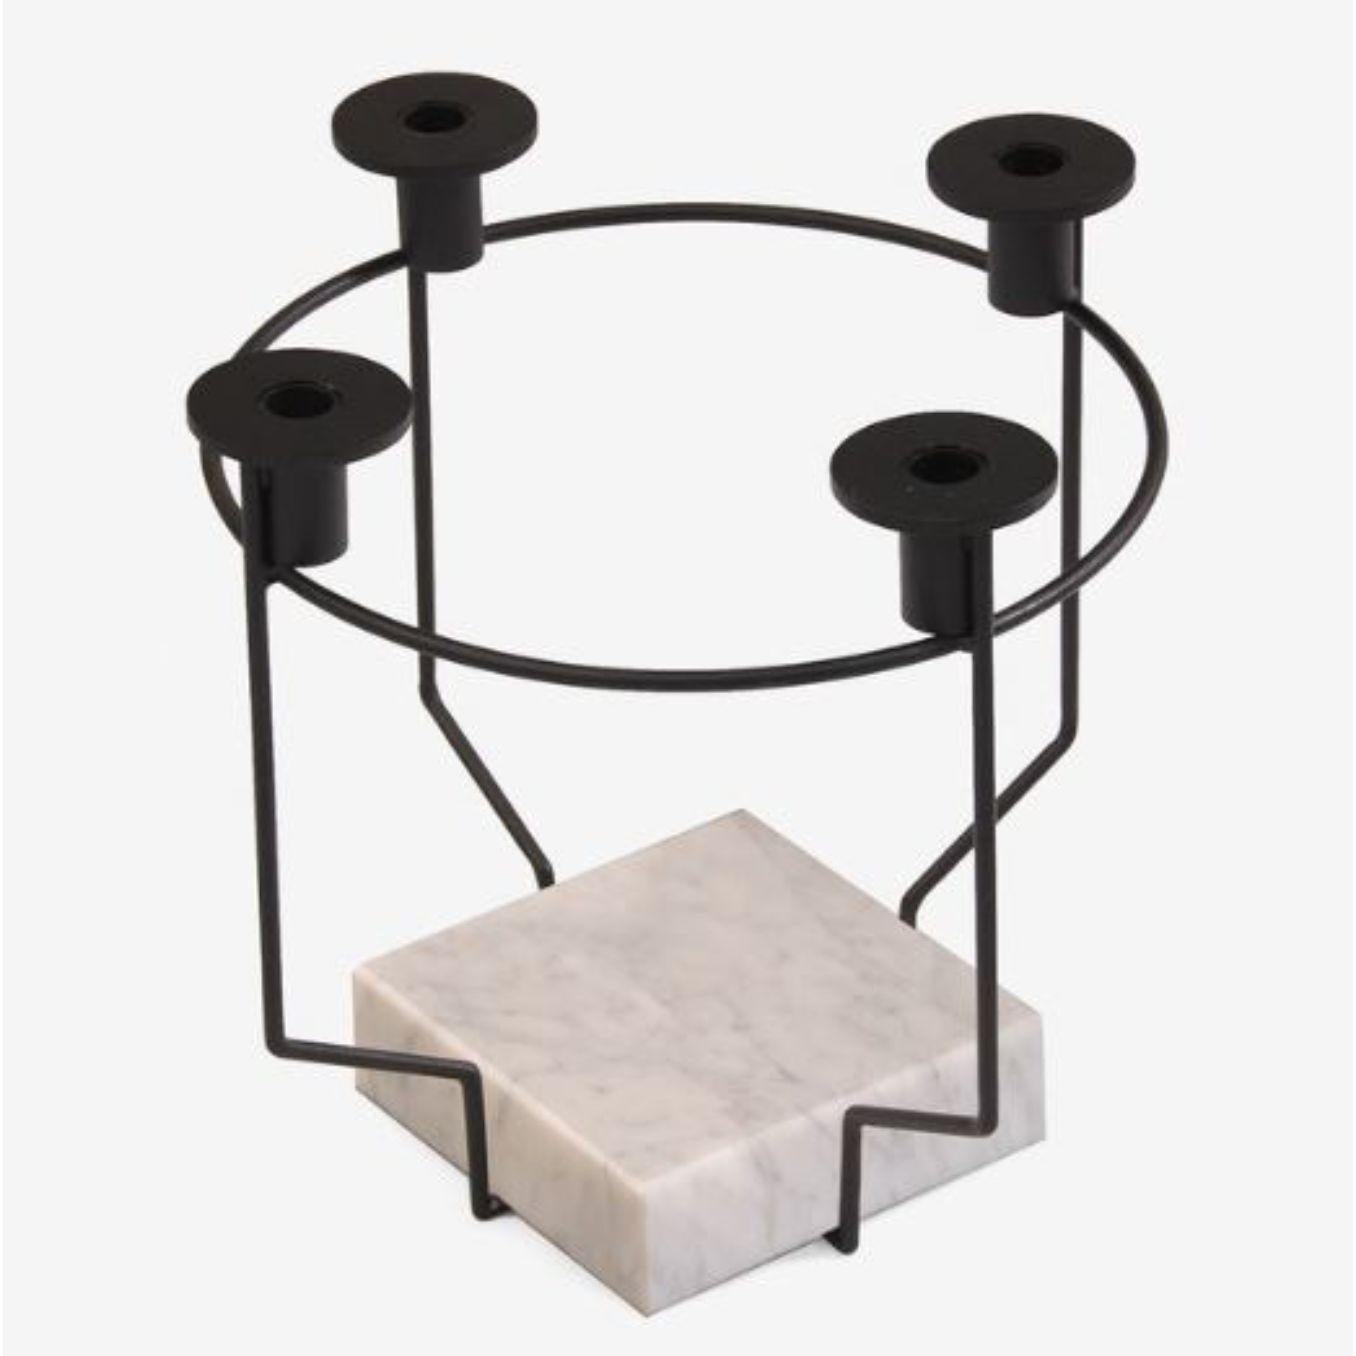 Lest candle holder by Radar
Design: Bastien Taillard
Materials: Metal, Carrara marble.
Dimensions: D 13.5 x W 18 x H 30.5 cm

Elegant, timeless, understated. The RADAR collection allows you to take a welcome break from the teeming world of